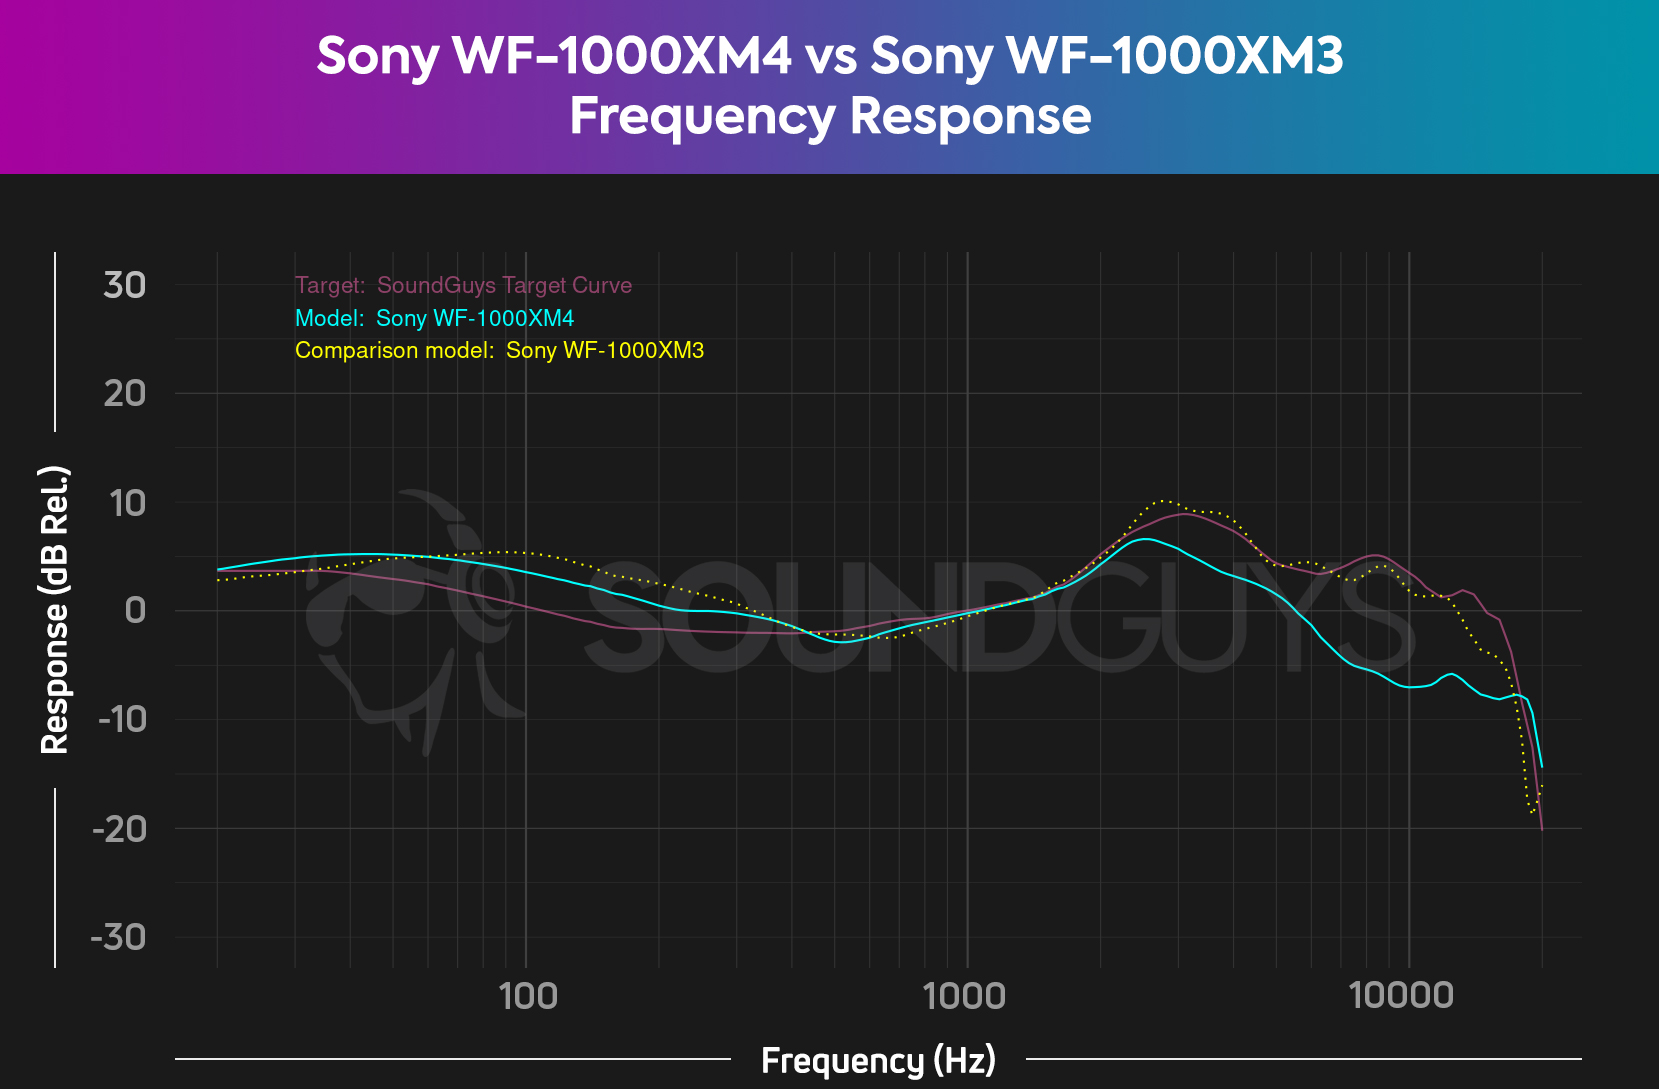 A chart compares the Sony WF-1000XM3 and Sony WF-1000XM4 frequency responses relative to our consumer curve V2 (pink), revealing the WF-1000XM3's more pleasing treble response.